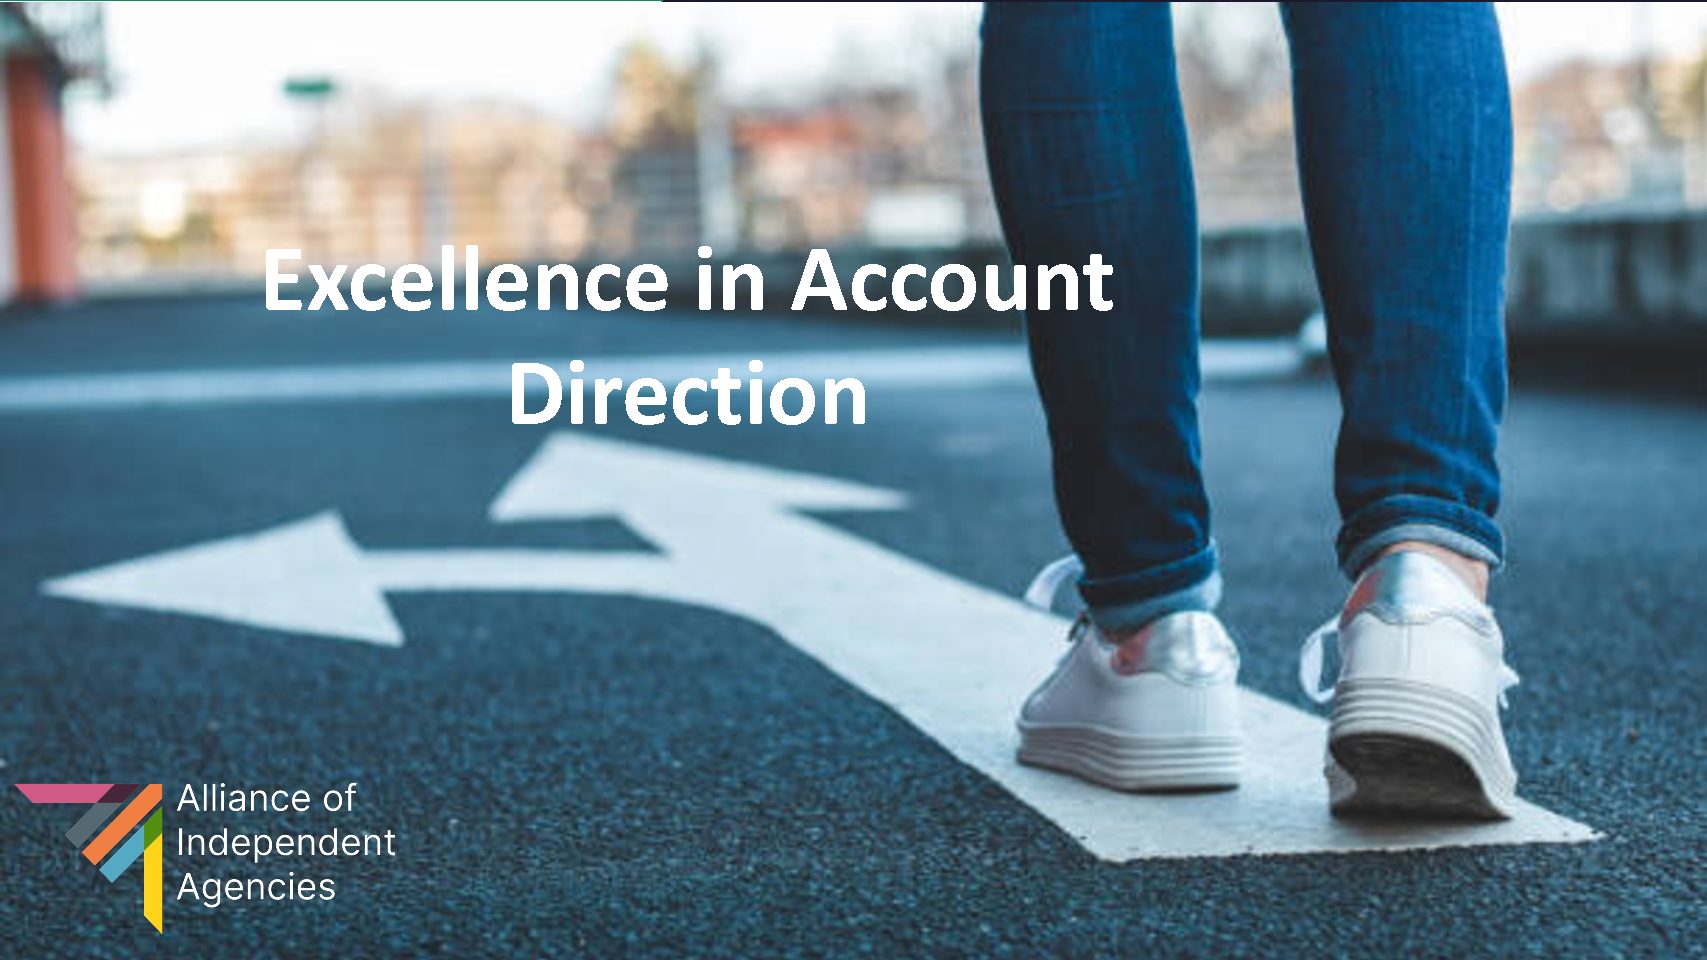 EXCELLENCE TRAINING : Excellence in Account Direction